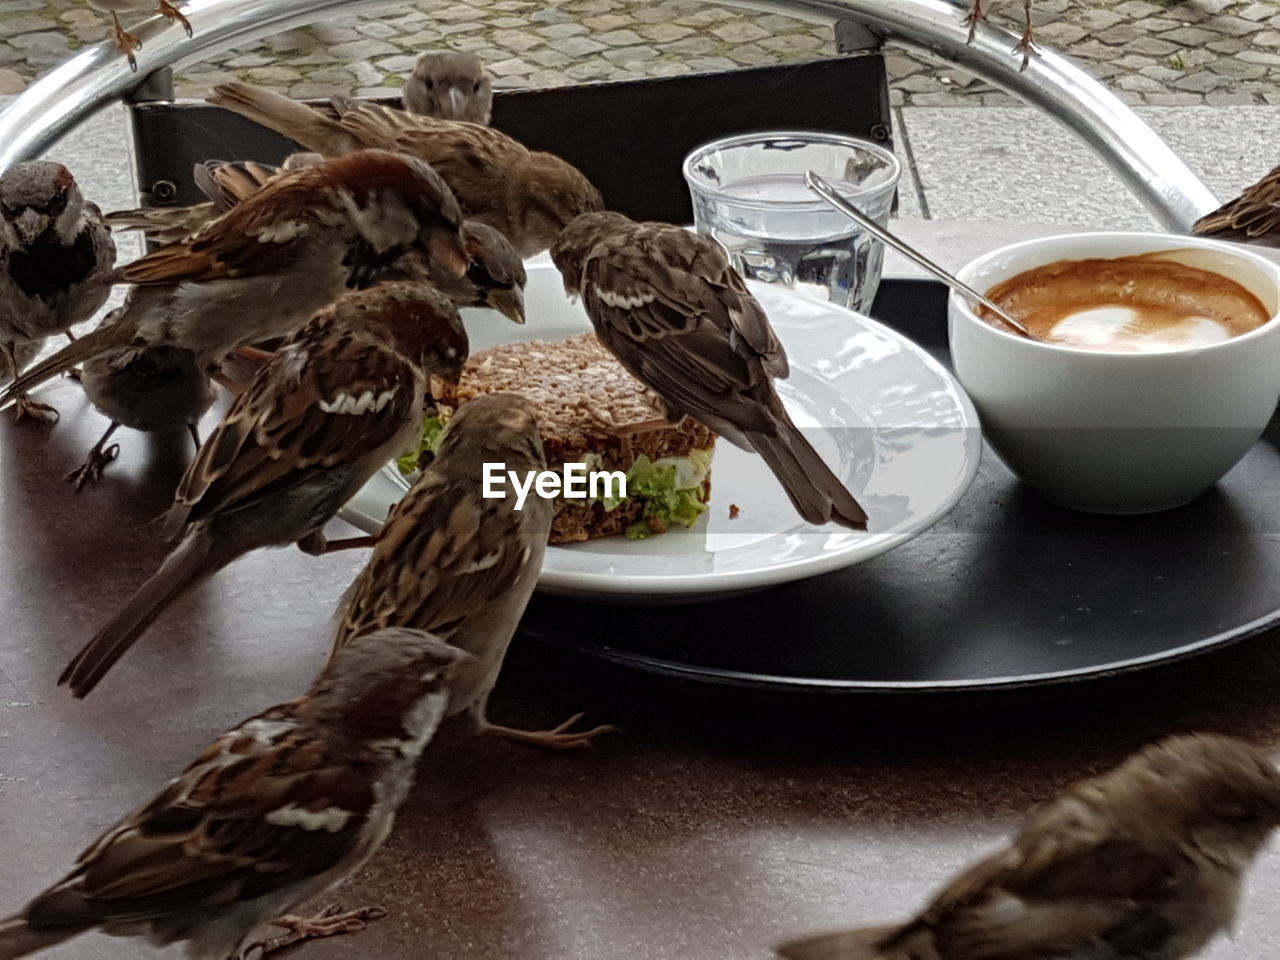 CLOSE-UP OF BIRDS IN PLATE